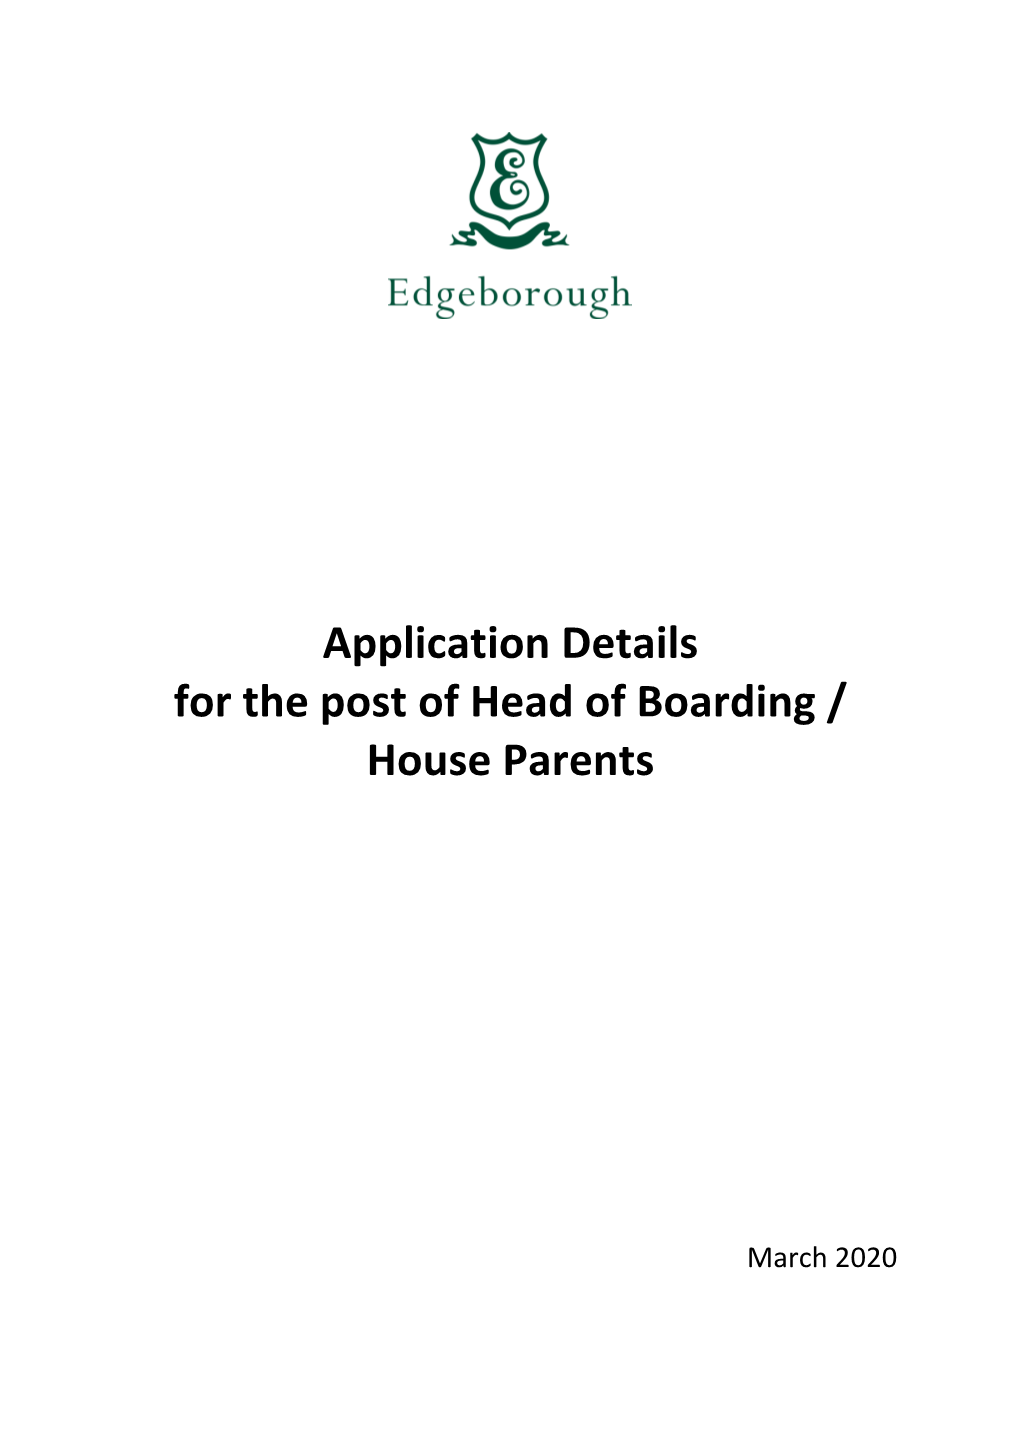 Application Details for the Post of Head of Boarding / House Parents